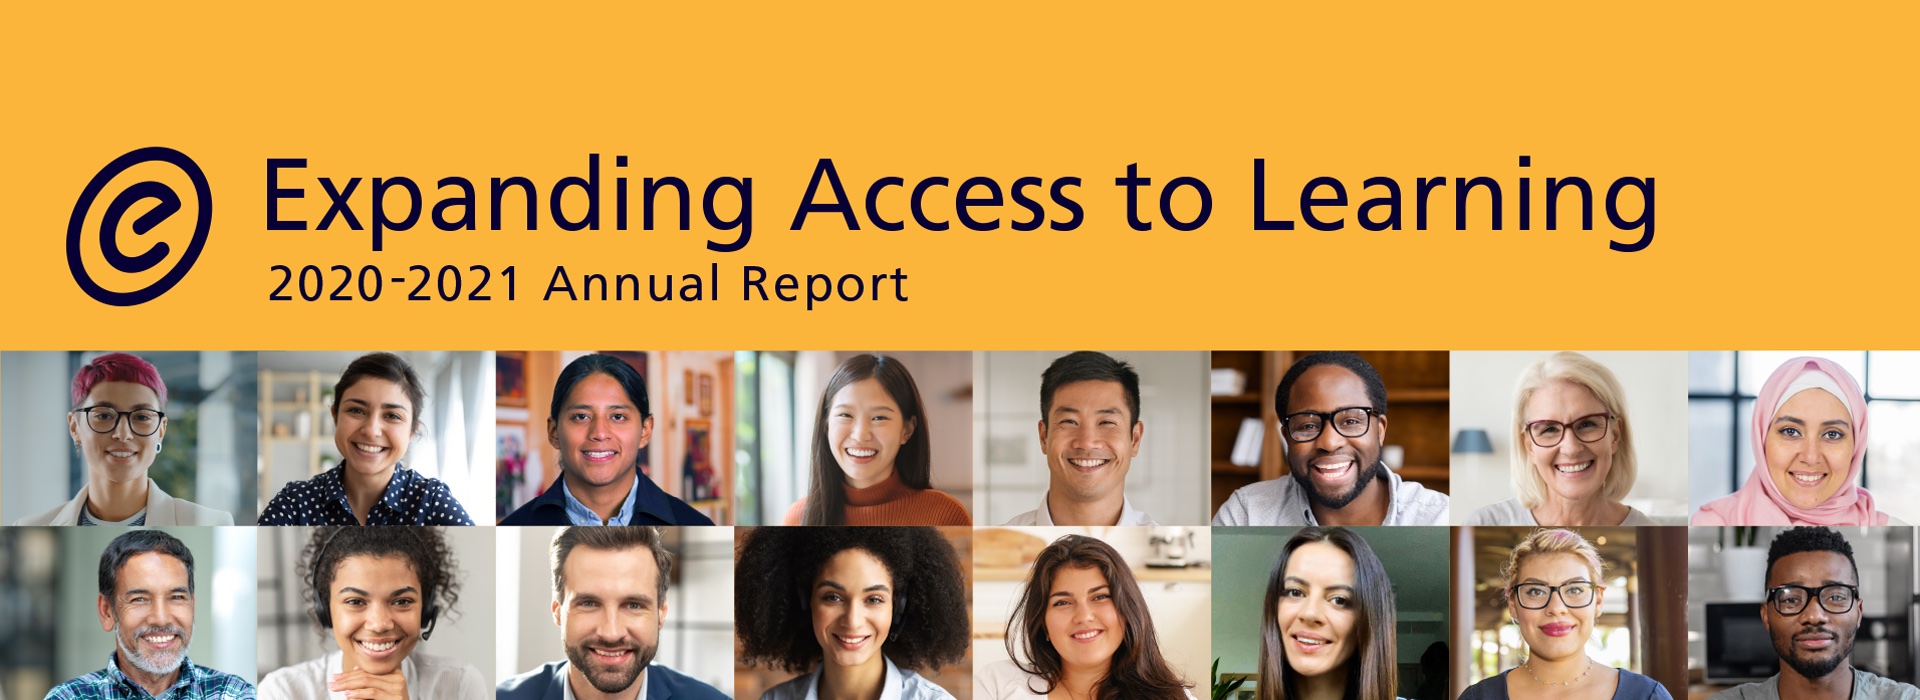 Expanding Access to Learning - 2020-2021 Annual Report